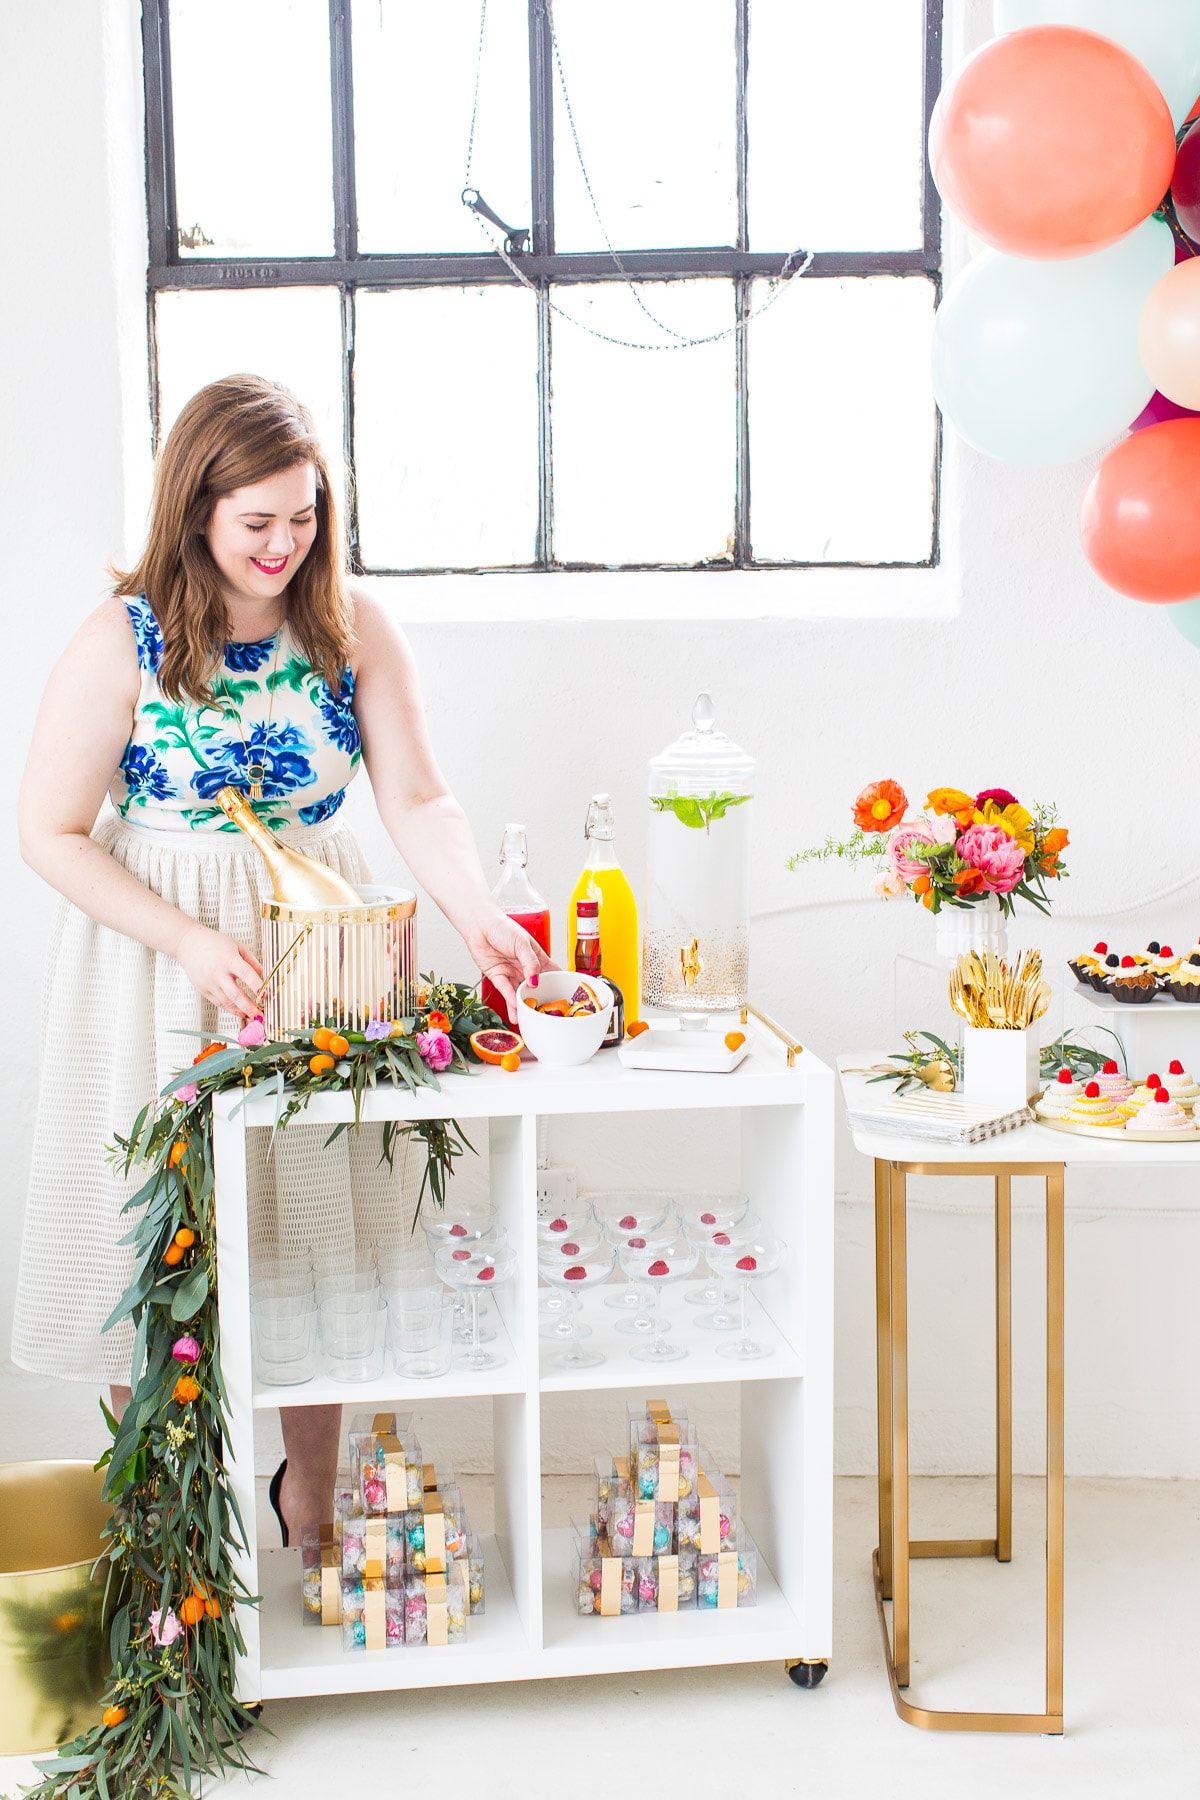 The perfect floral Spring Bridal Shower we hosted in the Sugar & Cloth studio by Ashley Rose of Sugar & Cloth, an award winning DIY blog.